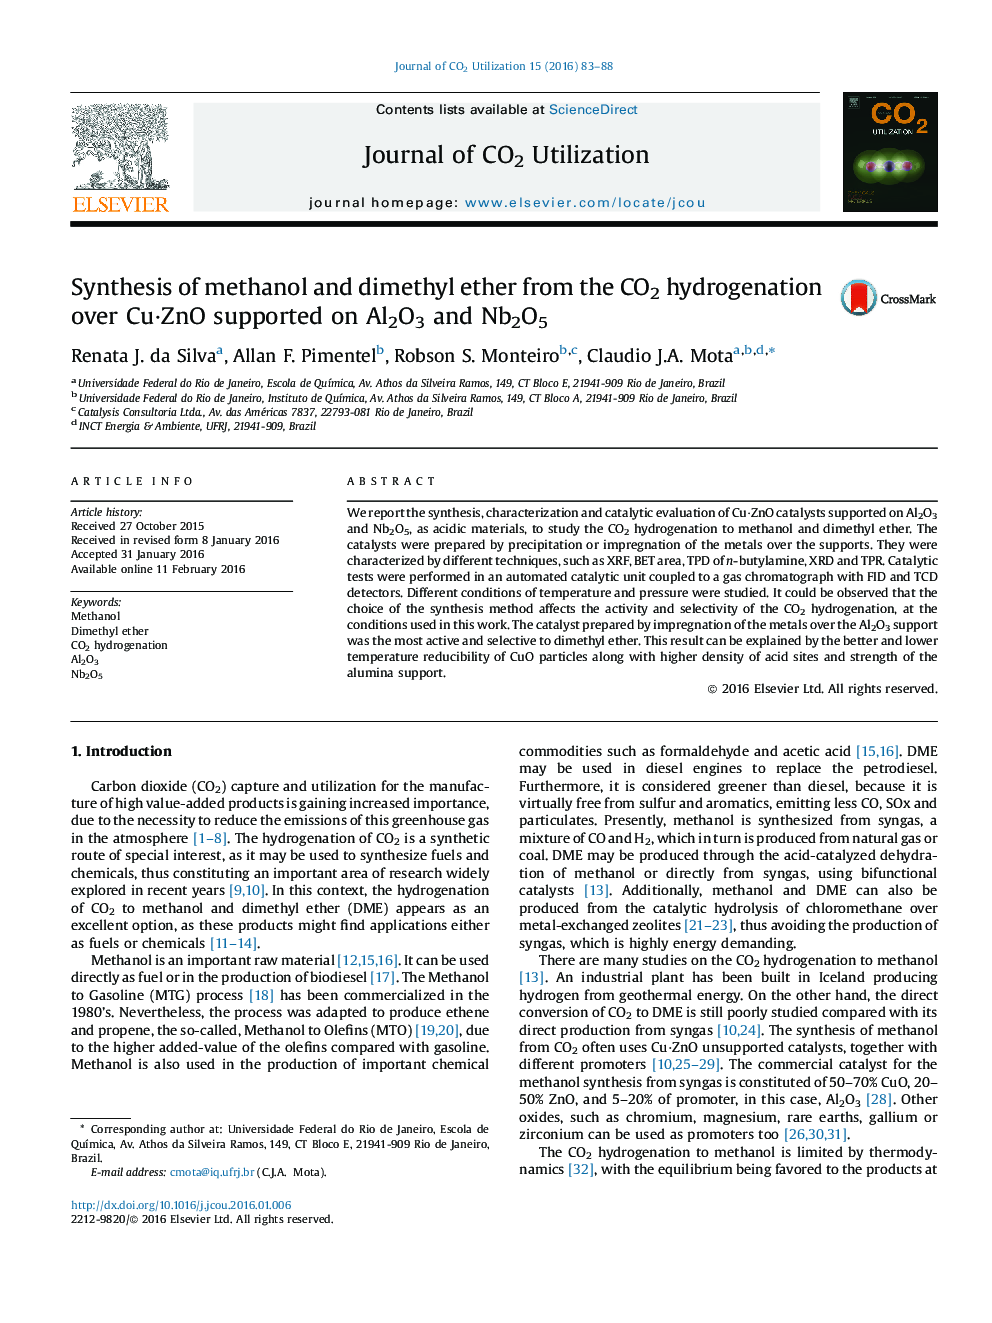 Synthesis of methanol and dimethyl ether from the CO2 hydrogenation over CuÂ·ZnO supported on Al2O3 and Nb2O5